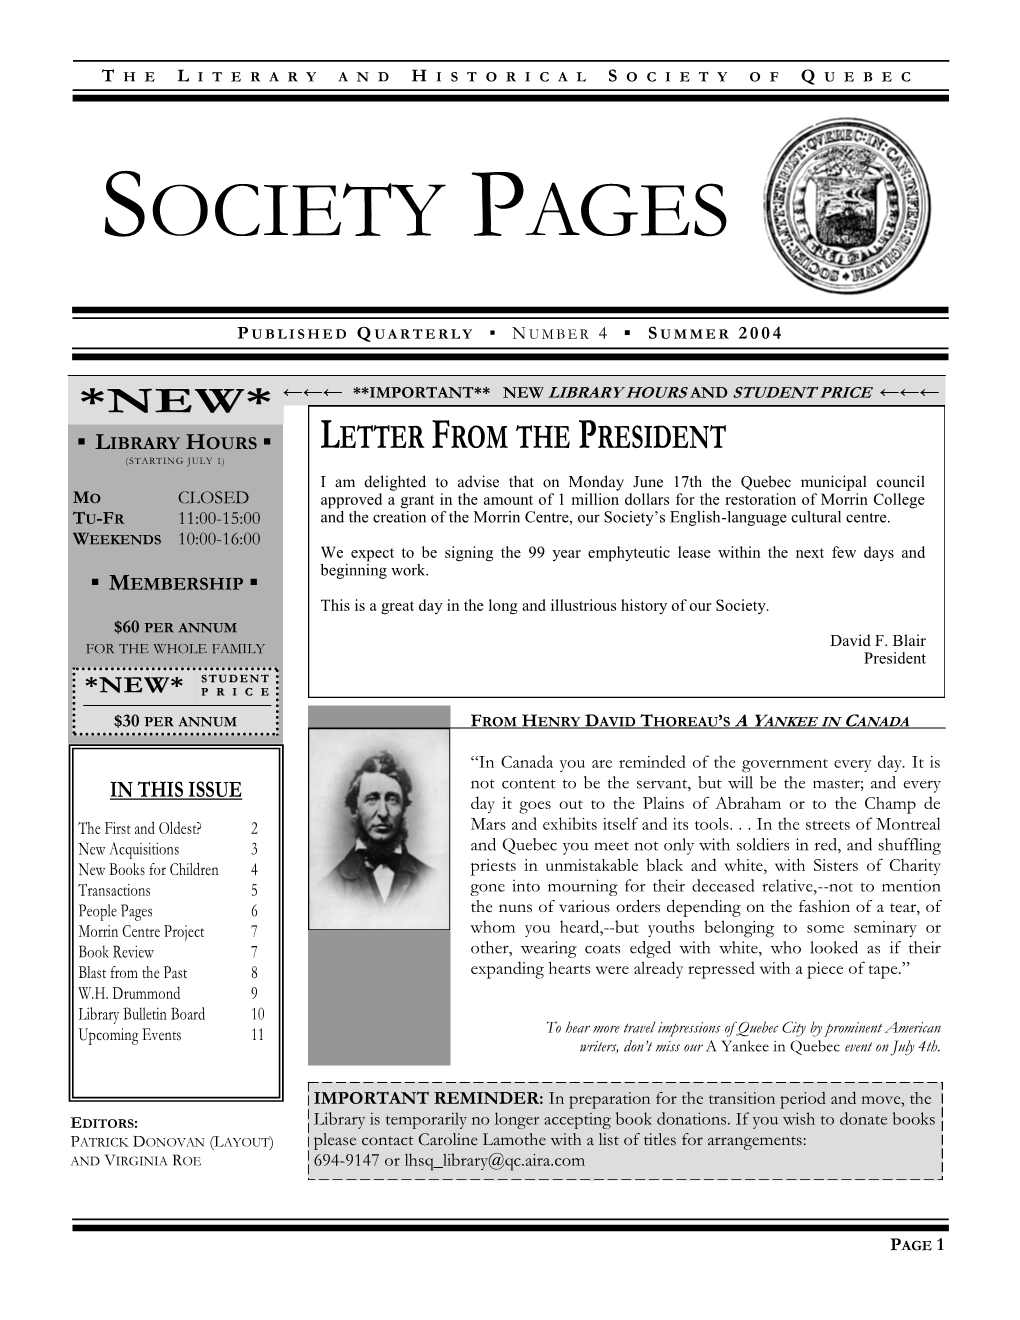 Society Pages